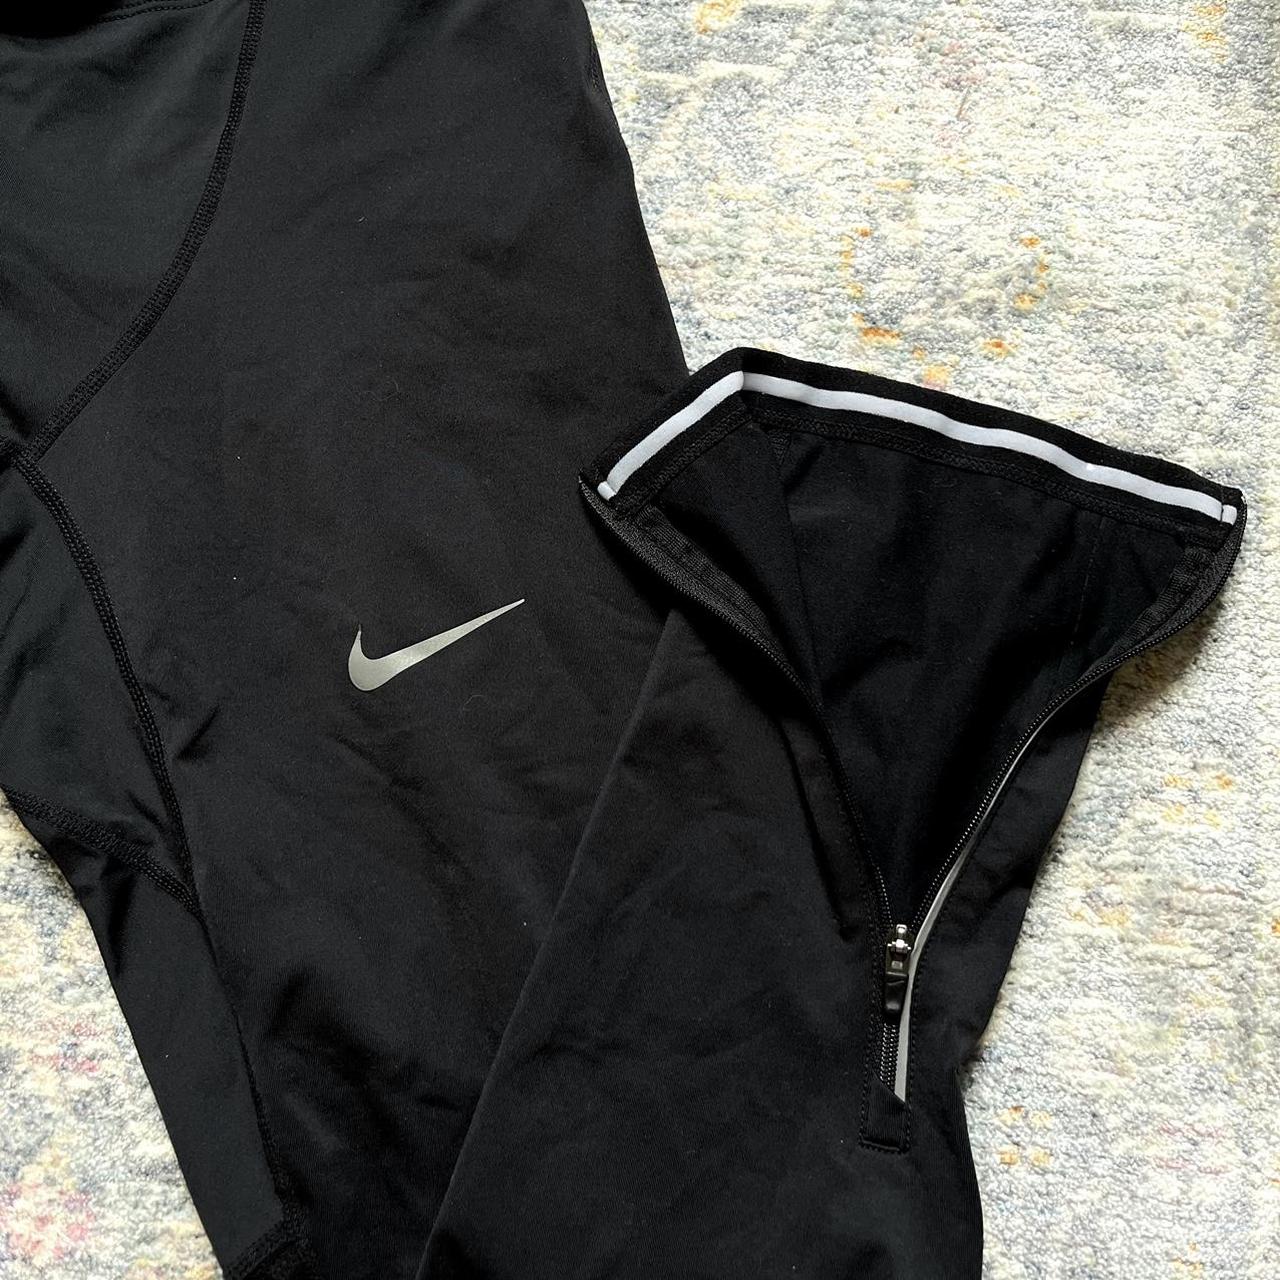 Nike dry-fit black workout leggings size small with - Depop